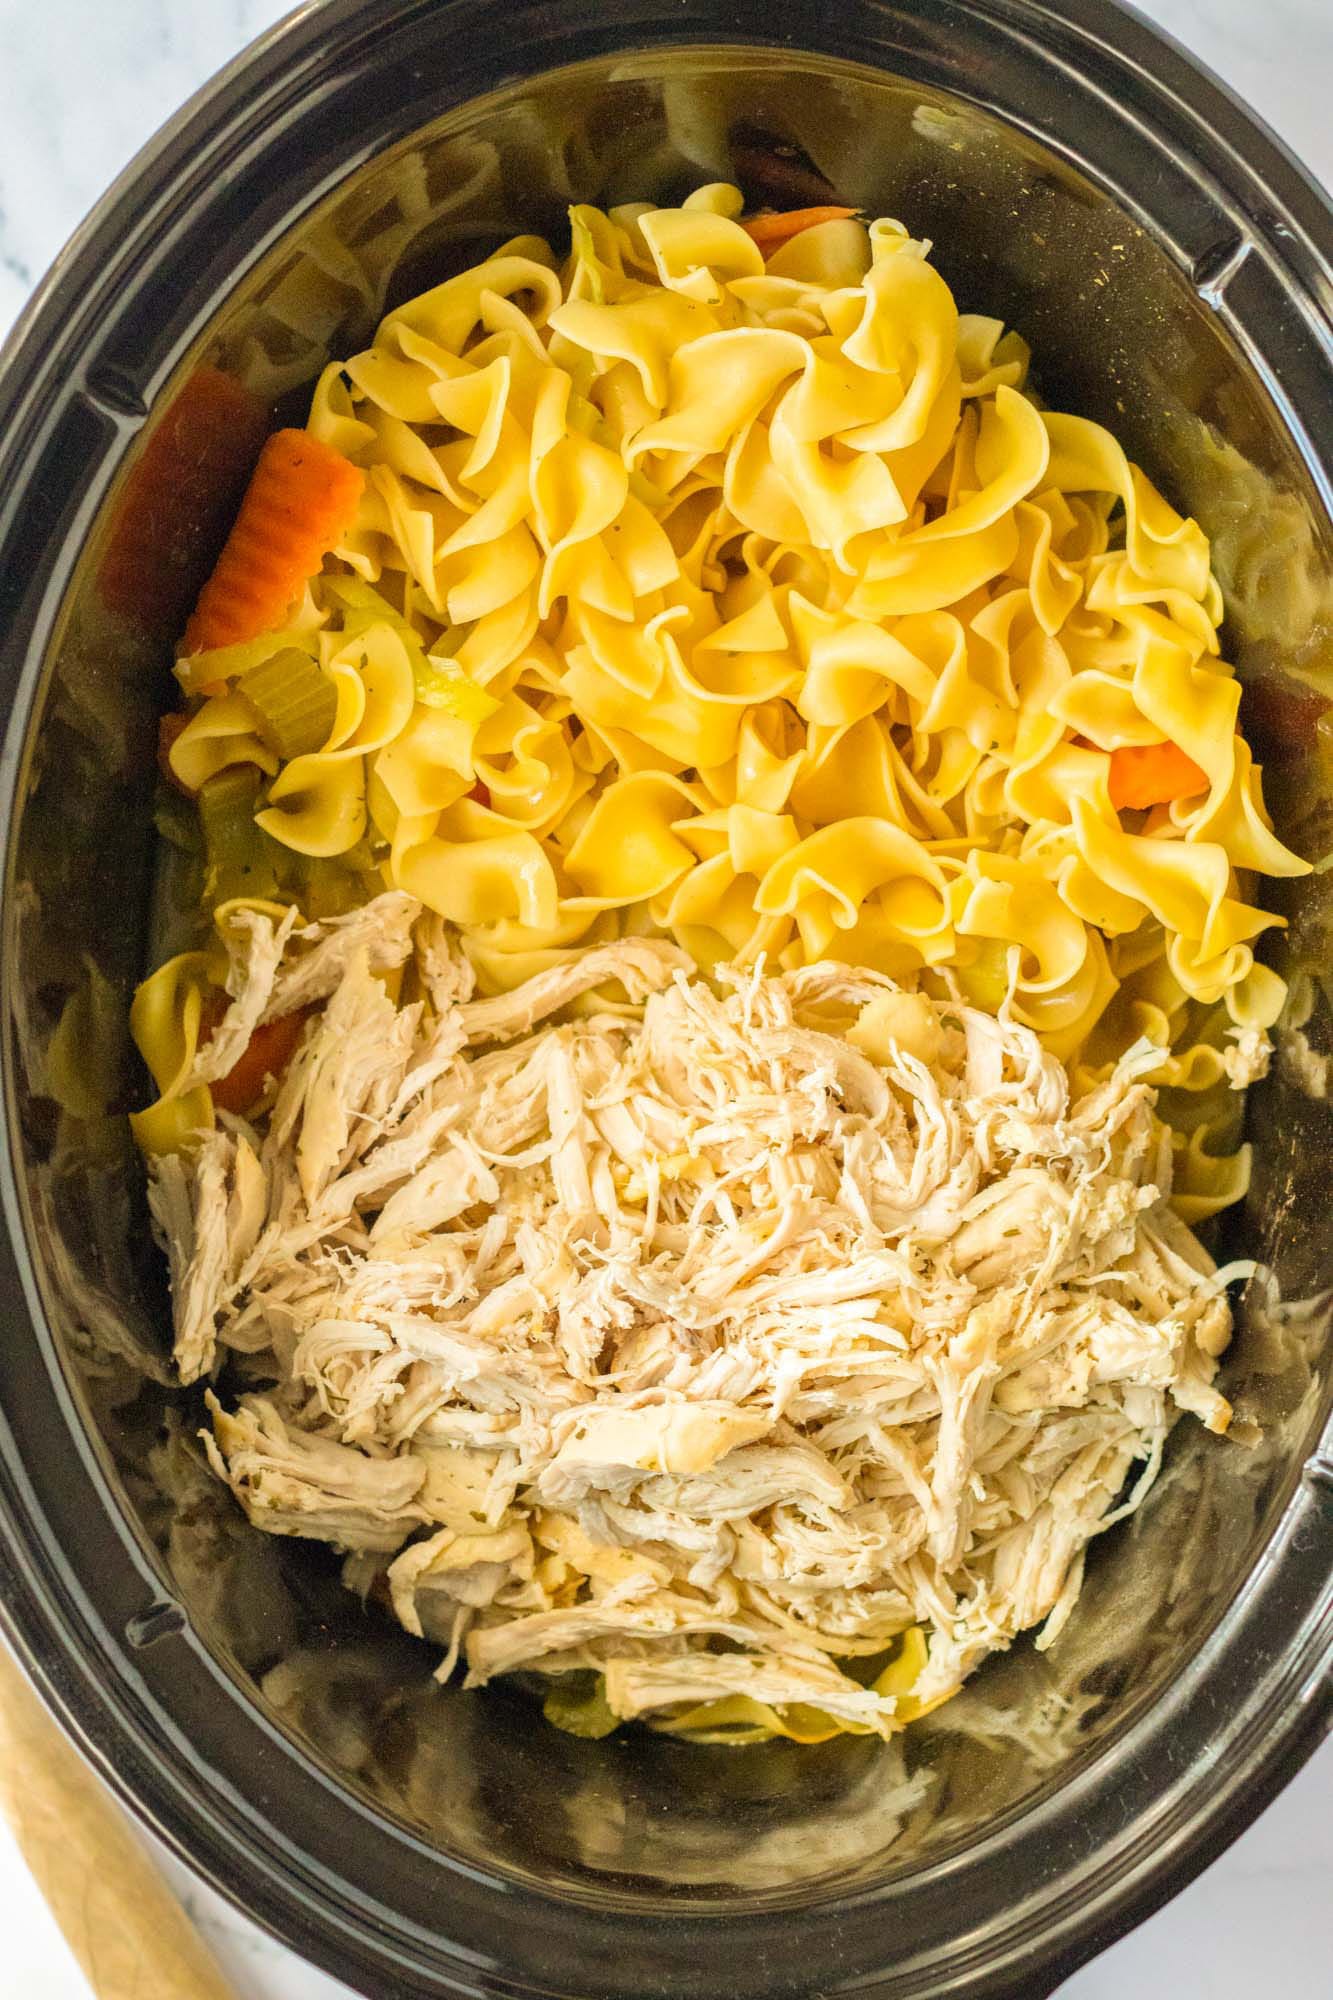 Overhead shot of noodles and shredded chicken in a crockpot